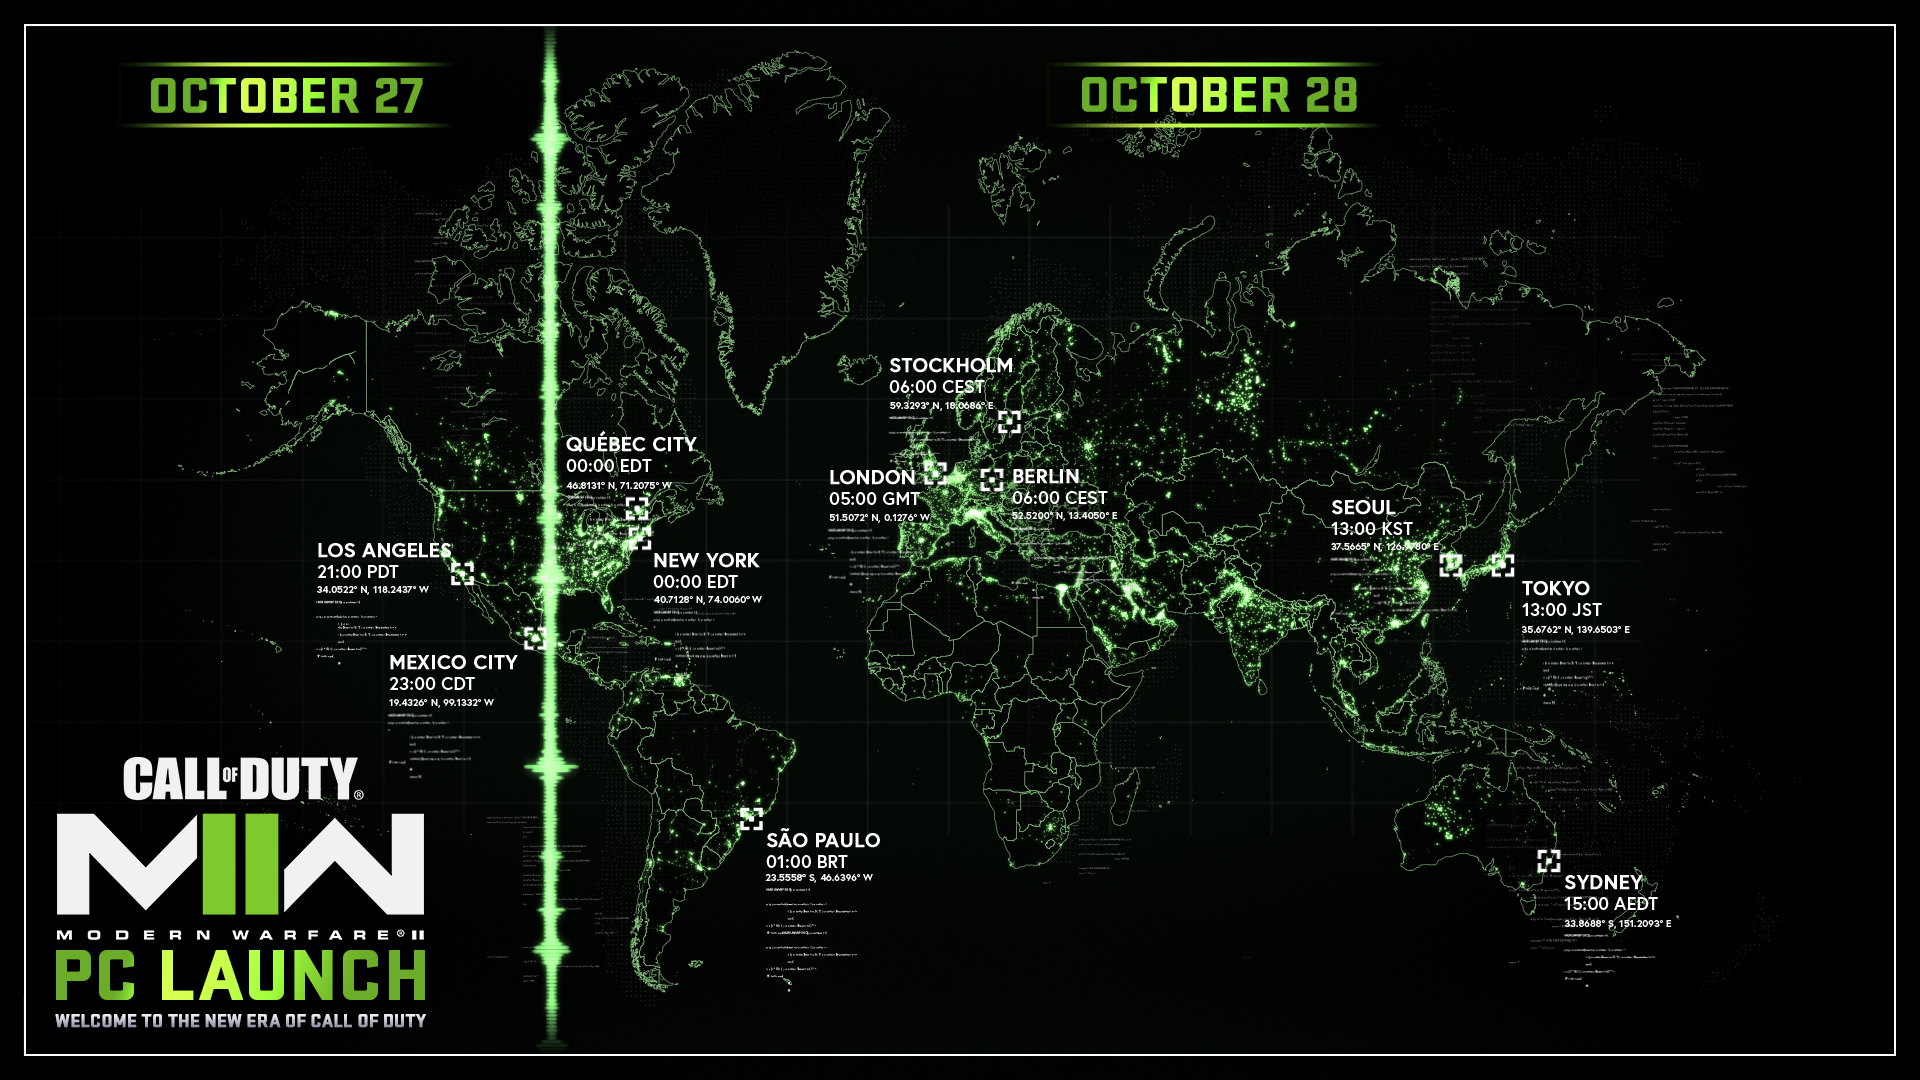 Call of Duty News on Twitter: "MW2 Release Times –Xbox &amp; October 28: 🕛 Midnight Local Time October 27: 🇺🇸 9 PM PDT 🇺🇸 11 PM CDT –PC– October 27: 🇺🇸